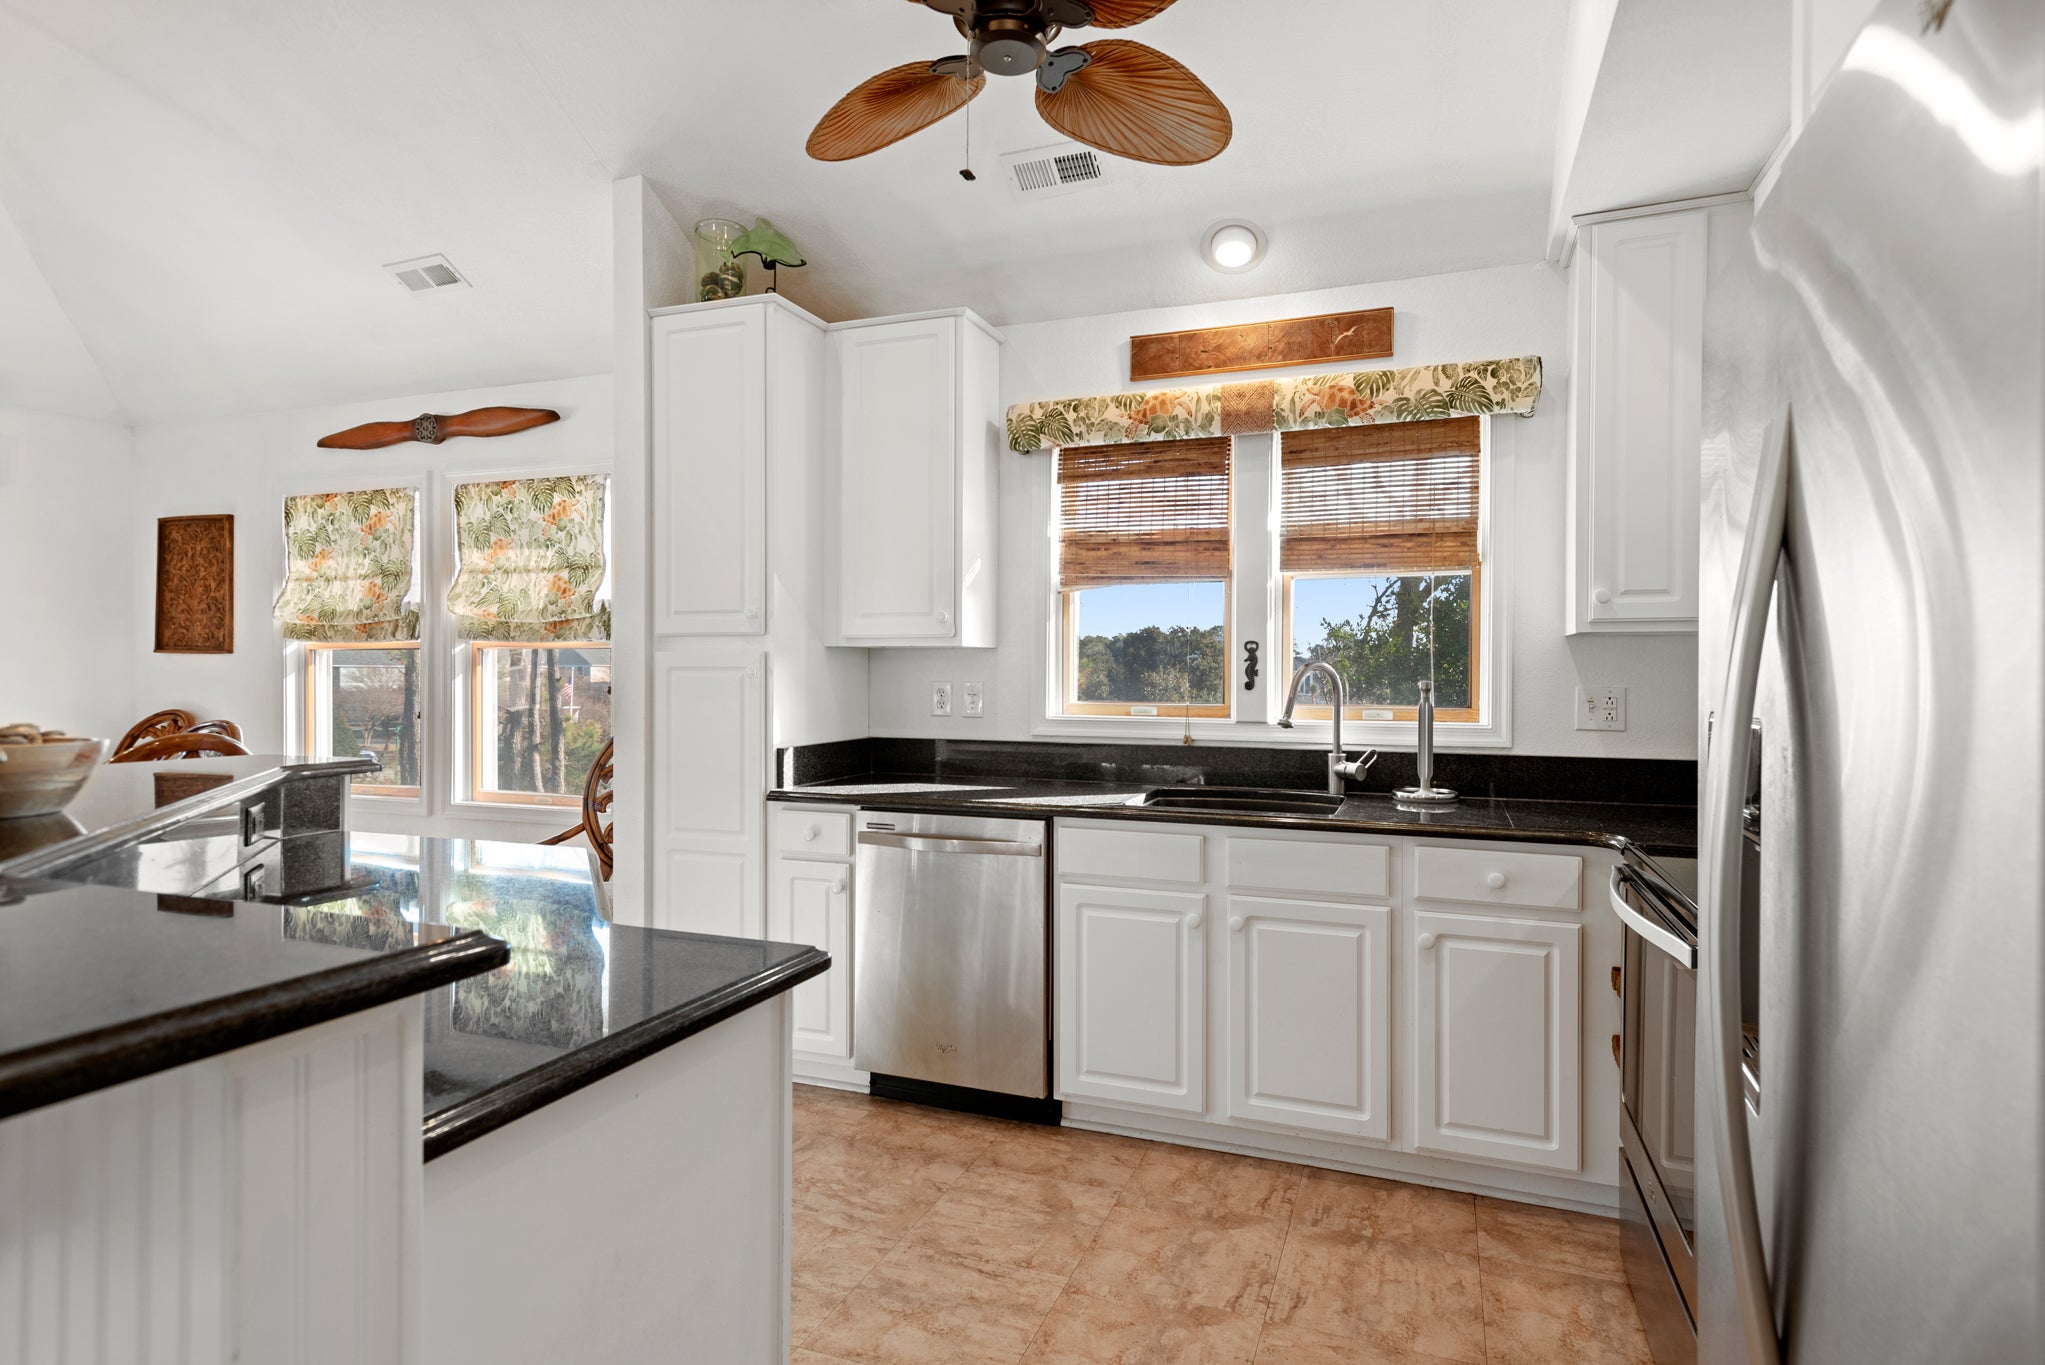 CL572: Endless Sunsets in Corolla Light l Top Level Kitchen Area